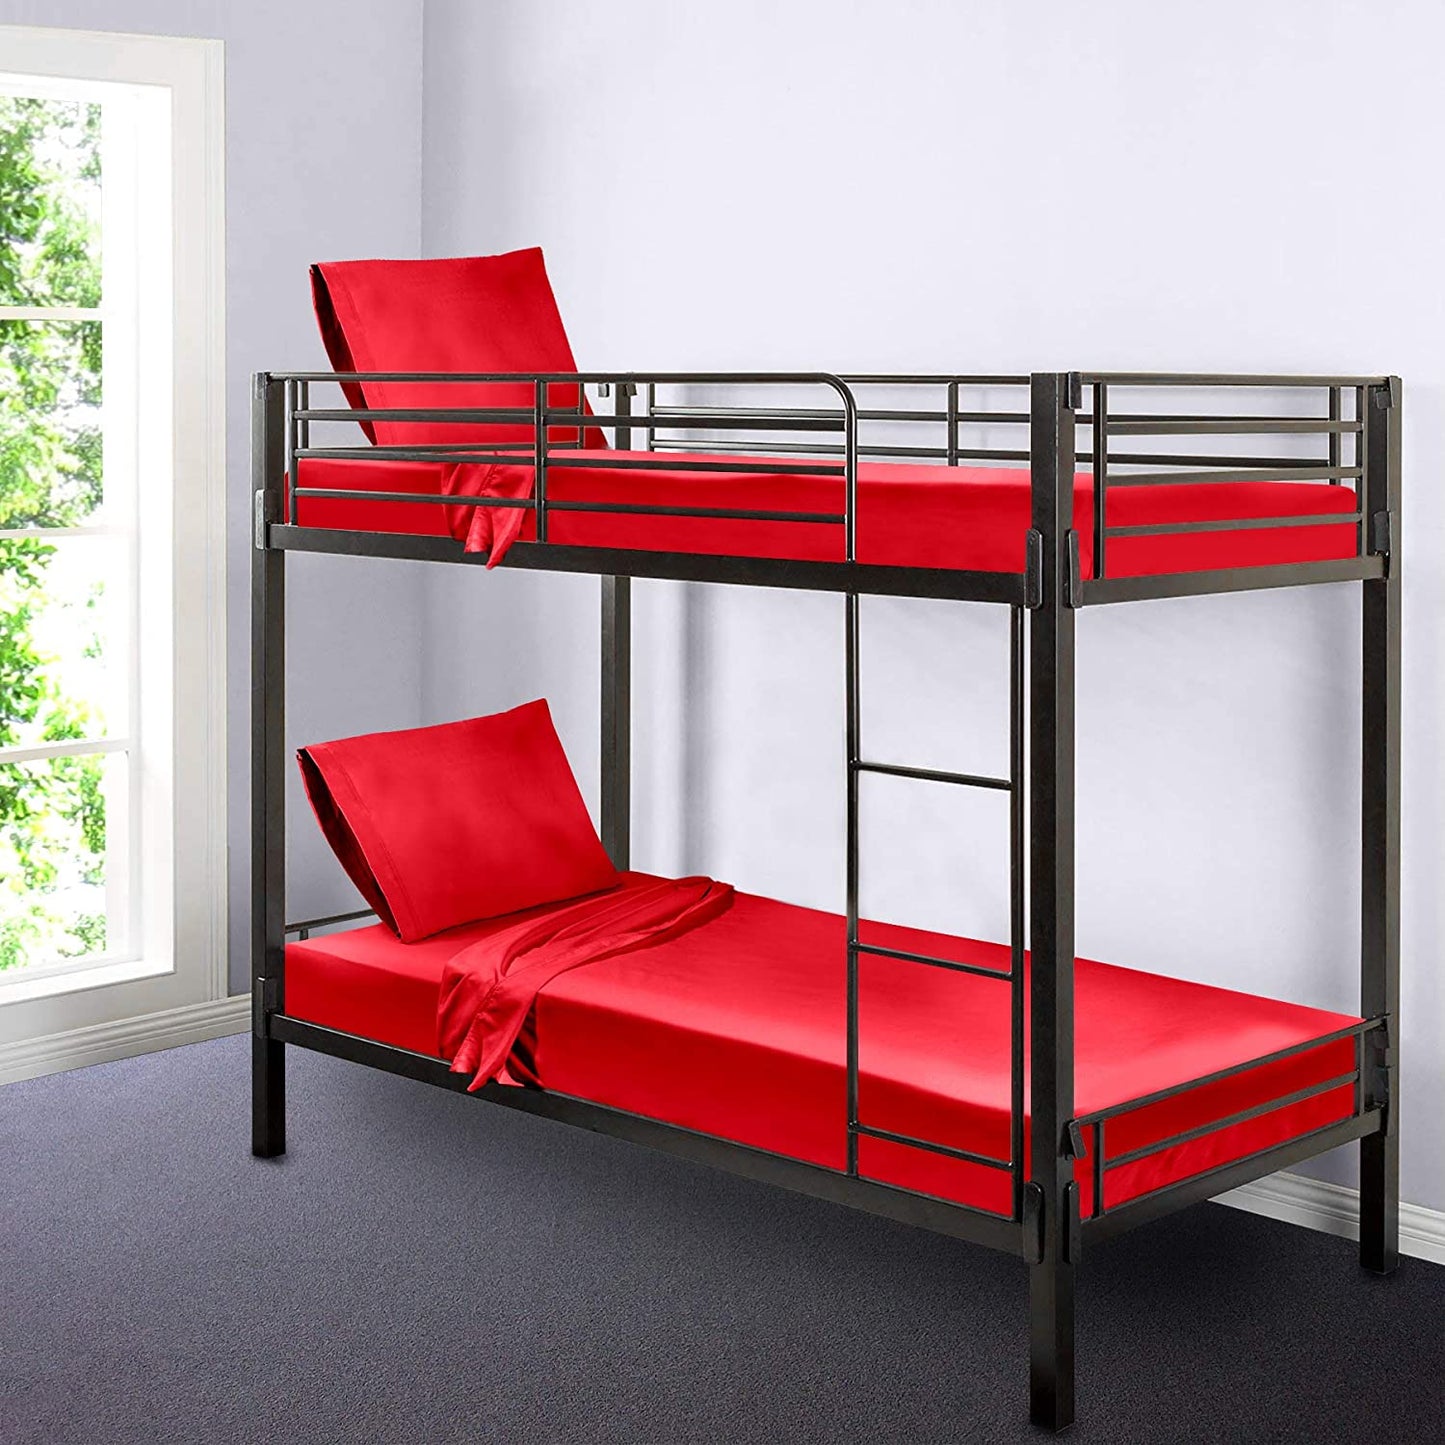 Gilbins 30" x 75" Cot Size 3-Piece Bed Sheet Set, Made of Ultra Soft Cotton, Perfect for Camp Bunk Beds/RVs/Guest Beds Red